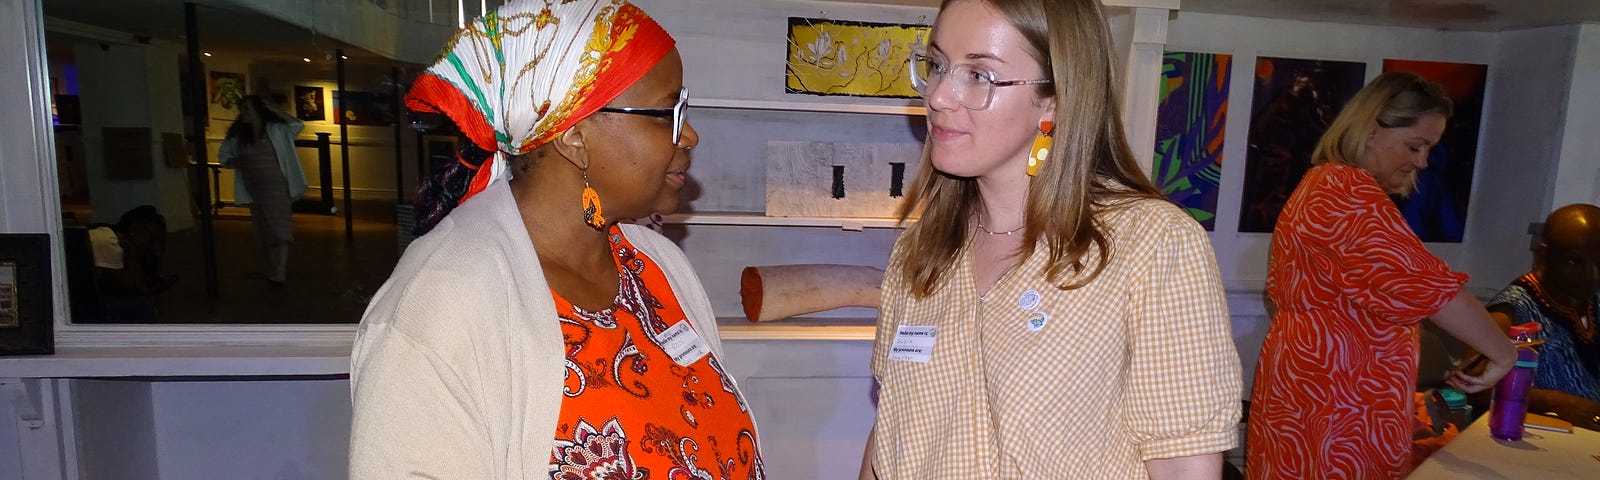 A black woman with a red dress and headscarf stands on the left, talking with a white blonde woman with a yellow top and white skirt on the right.